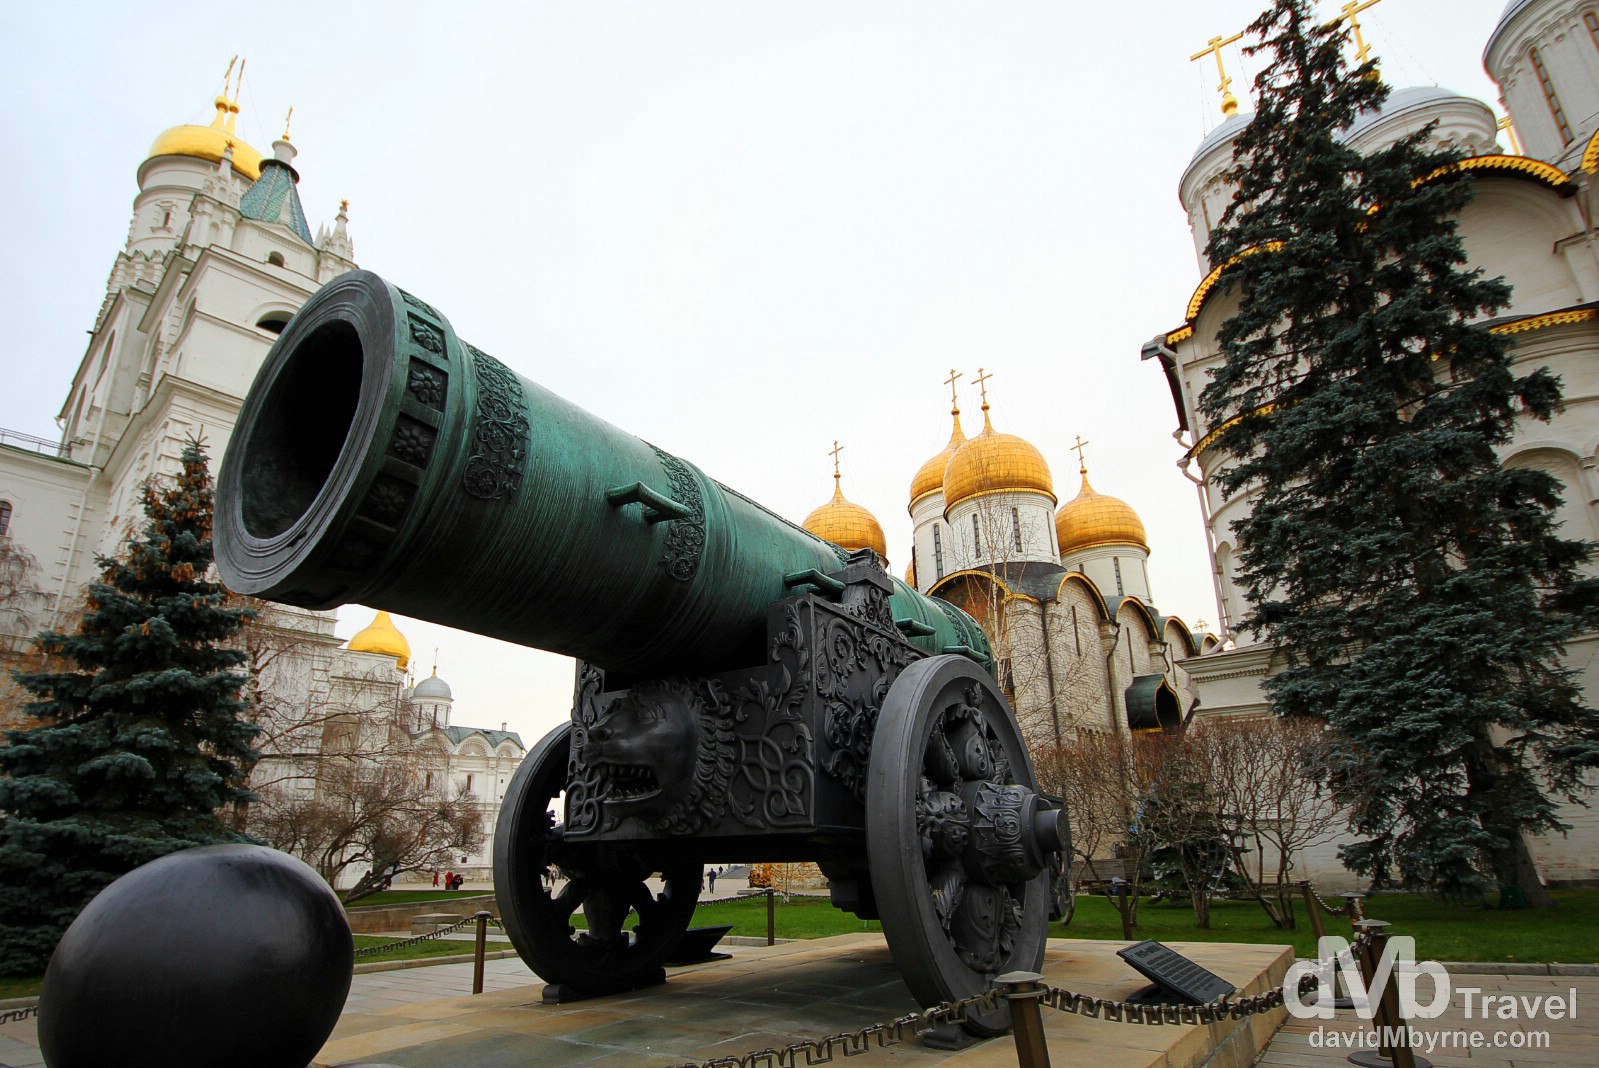 The Tsar Cannon in the grounds of The Kremlin in Moscow, Russia. November 19th 2012.